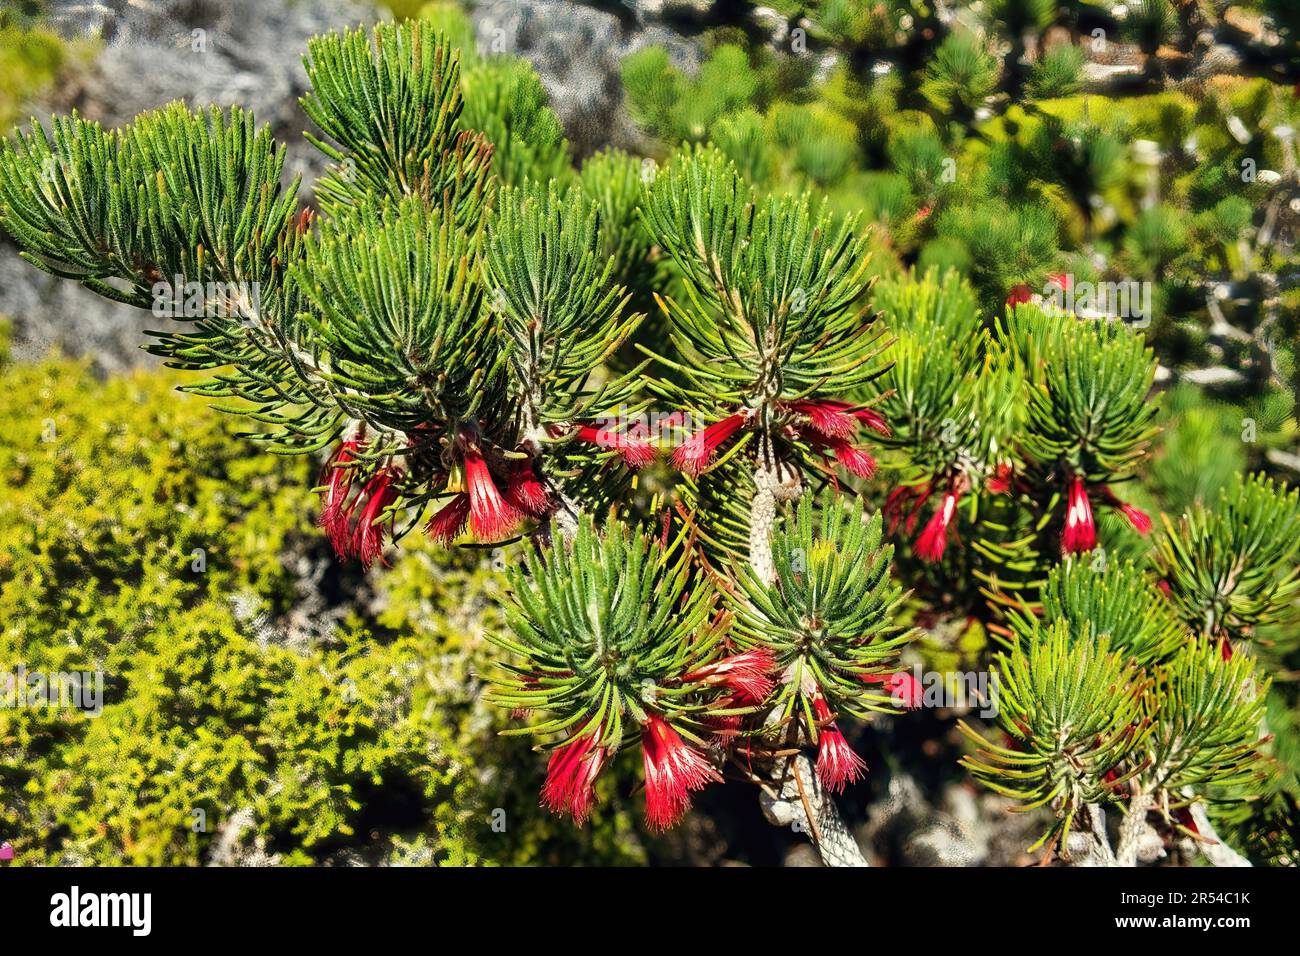 Calothamnus sanguineus or silky-leaved blood flower, a plant in the myrtle family (Myrtaceae), endemic in the southwest of Western Australia Stock Photo